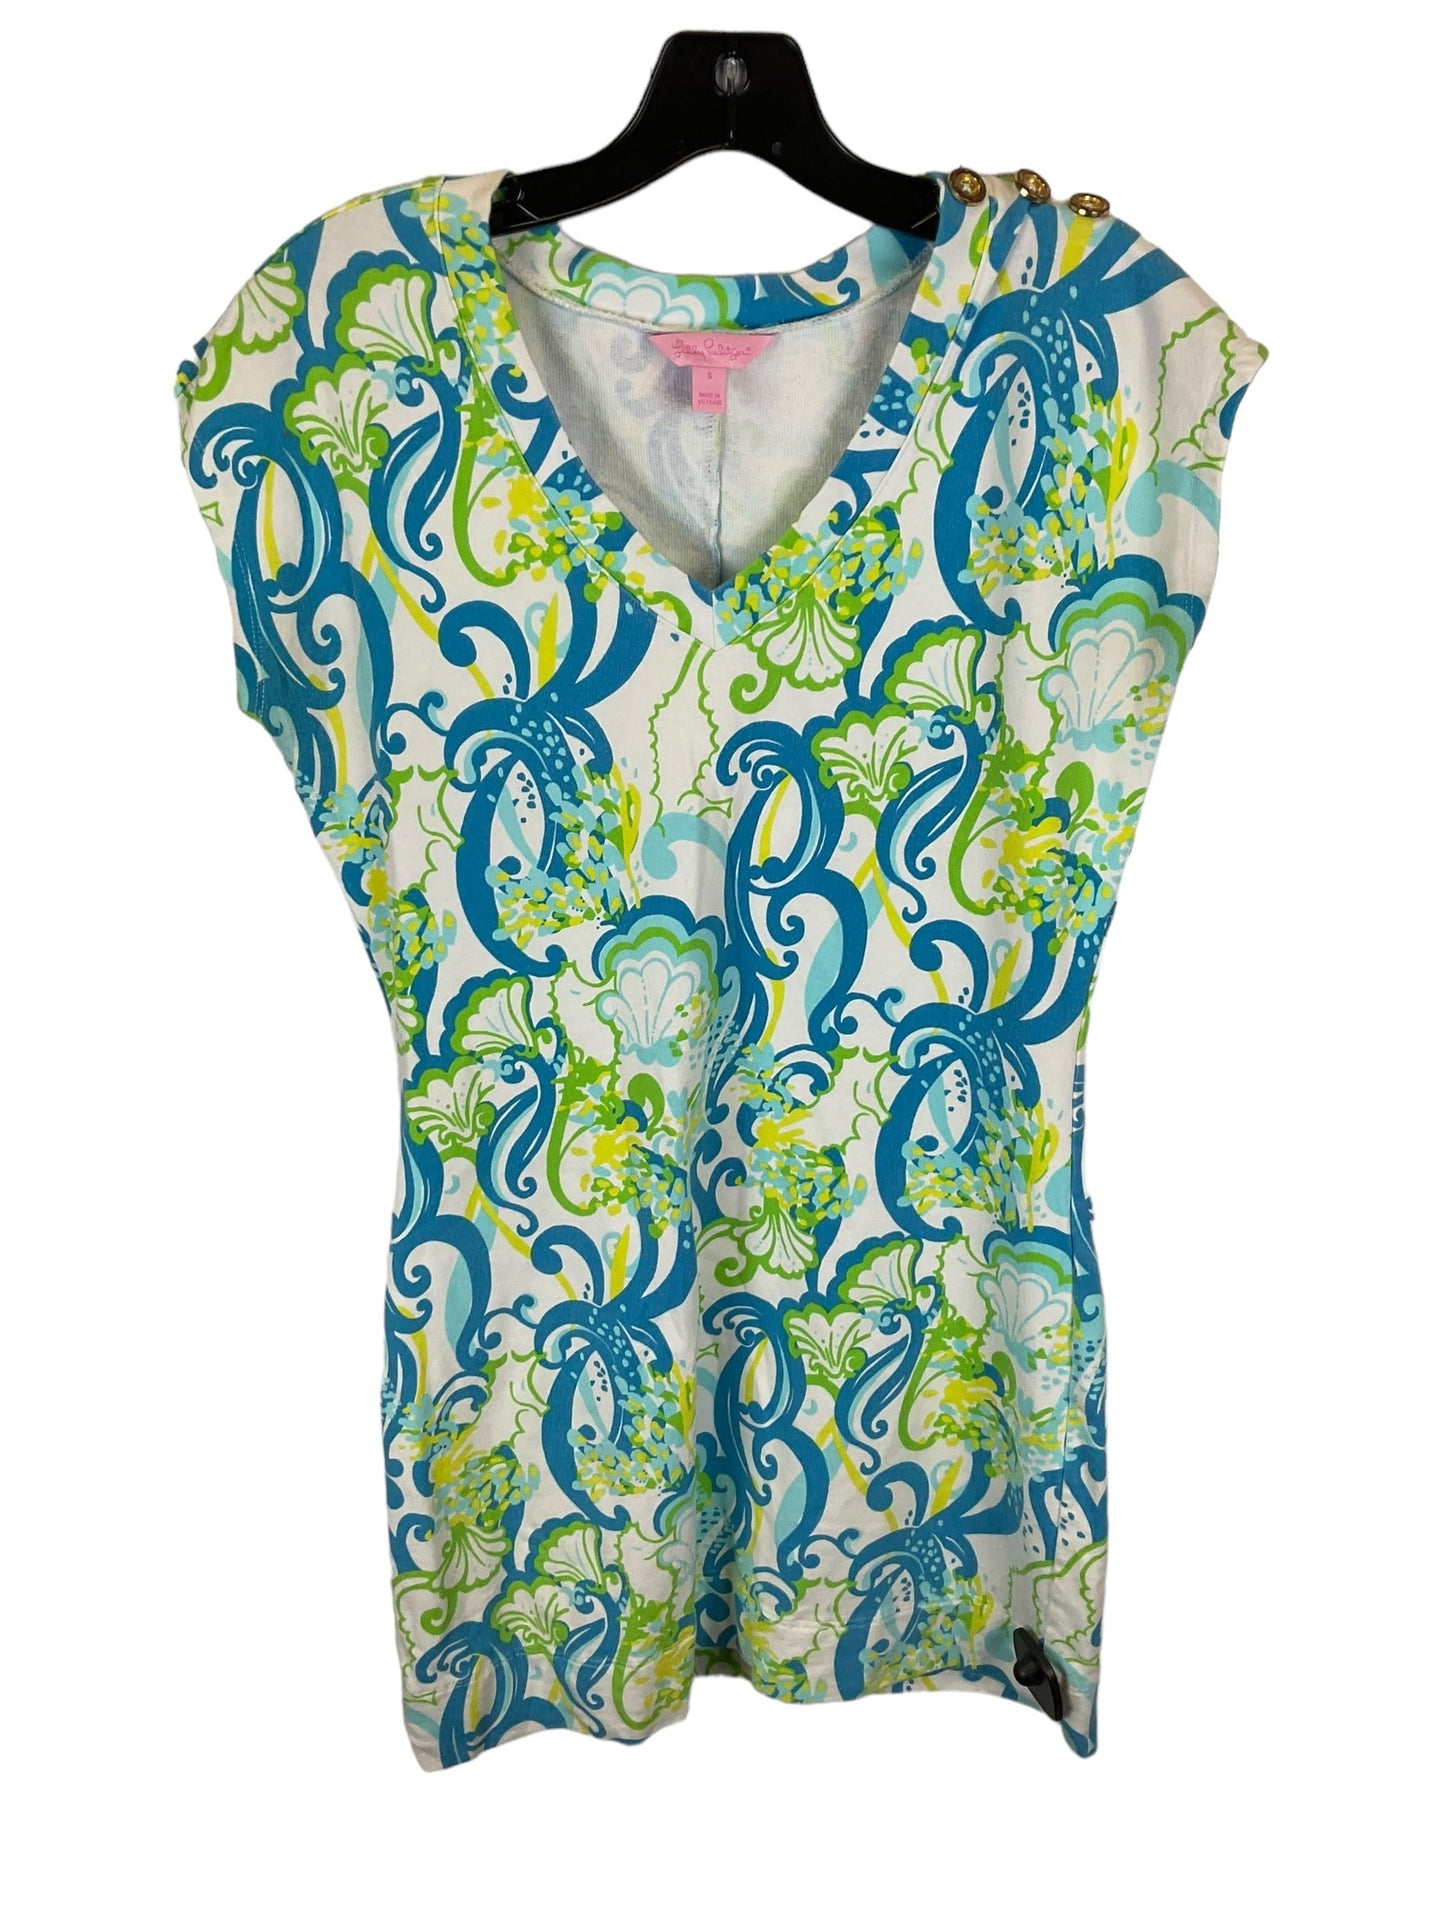 Multi-colored Dress Designer Lilly Pulitzer, Size S